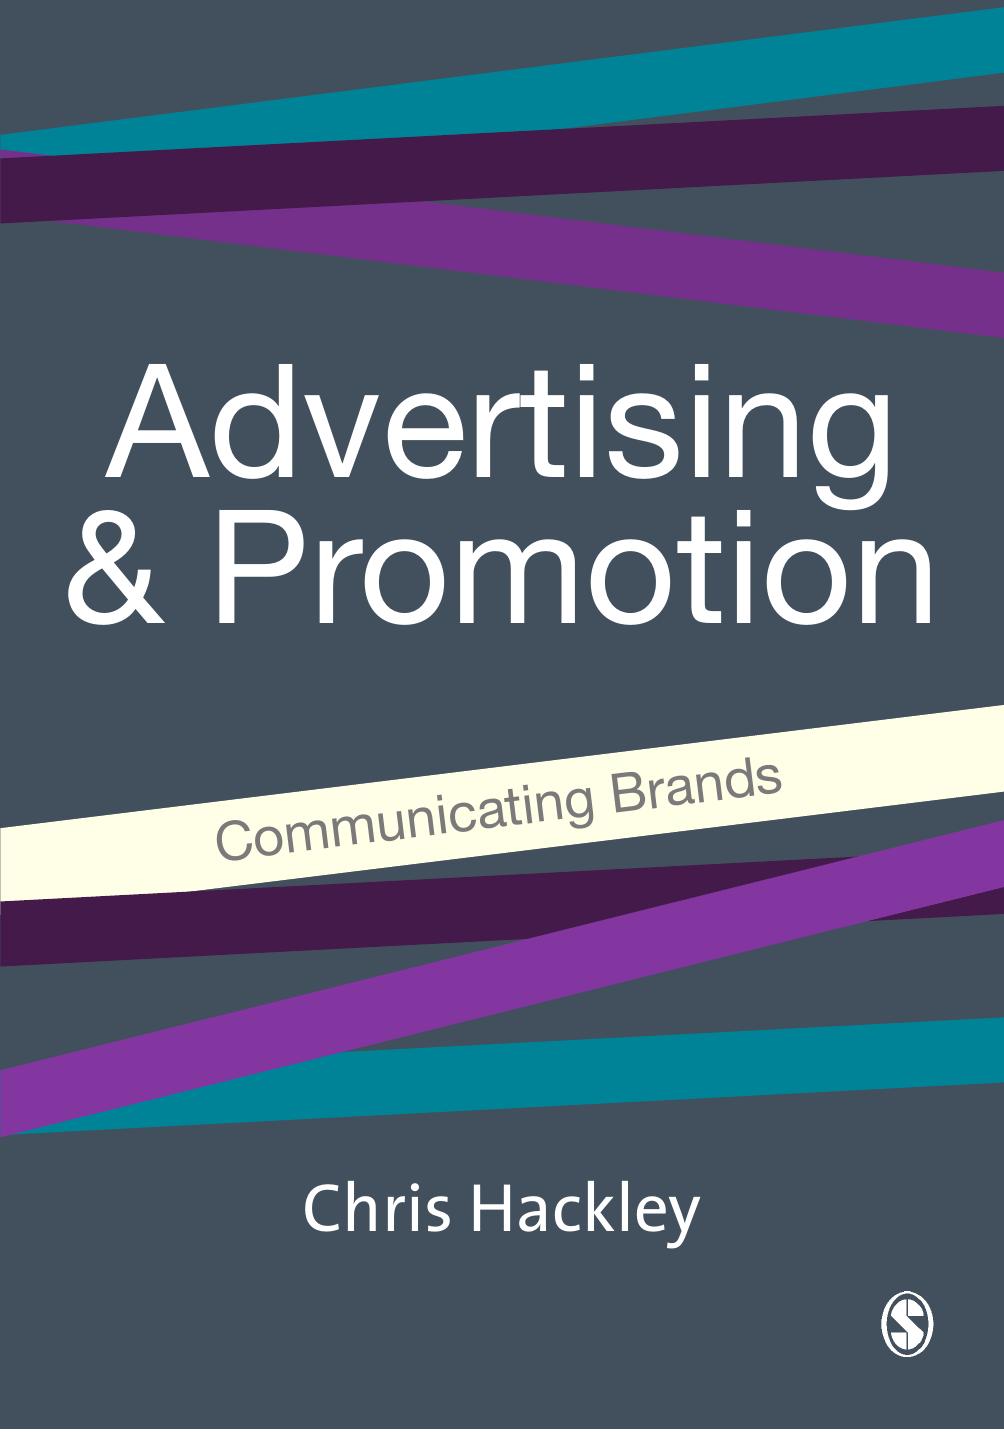 Dr Chris Hackley Advertising and Promotion Communicating Brands 2005